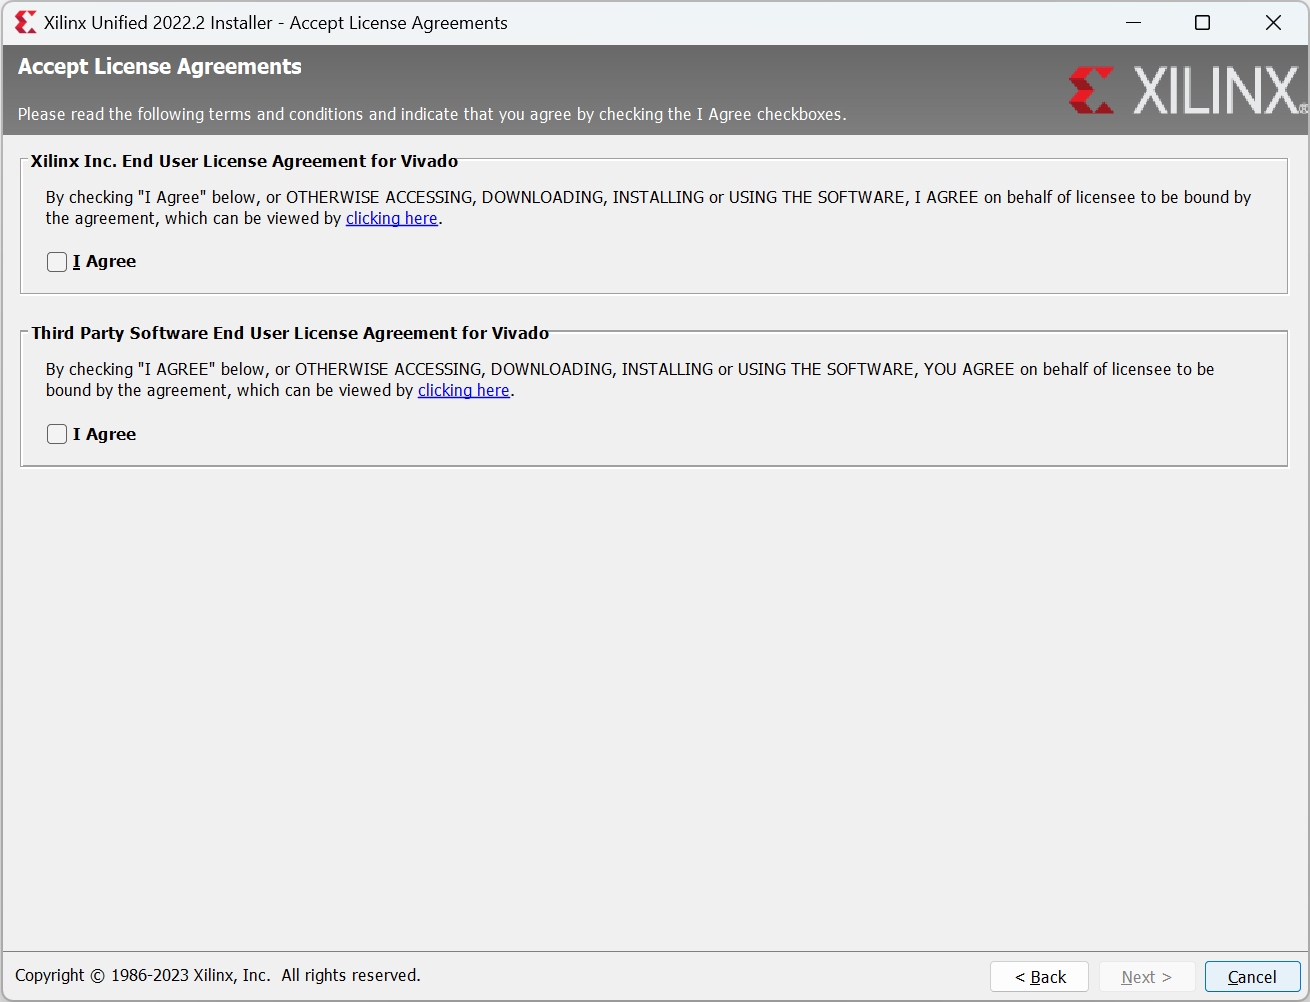 Xilinx Unified Installer "Accept License Agreements" Page Screenshot